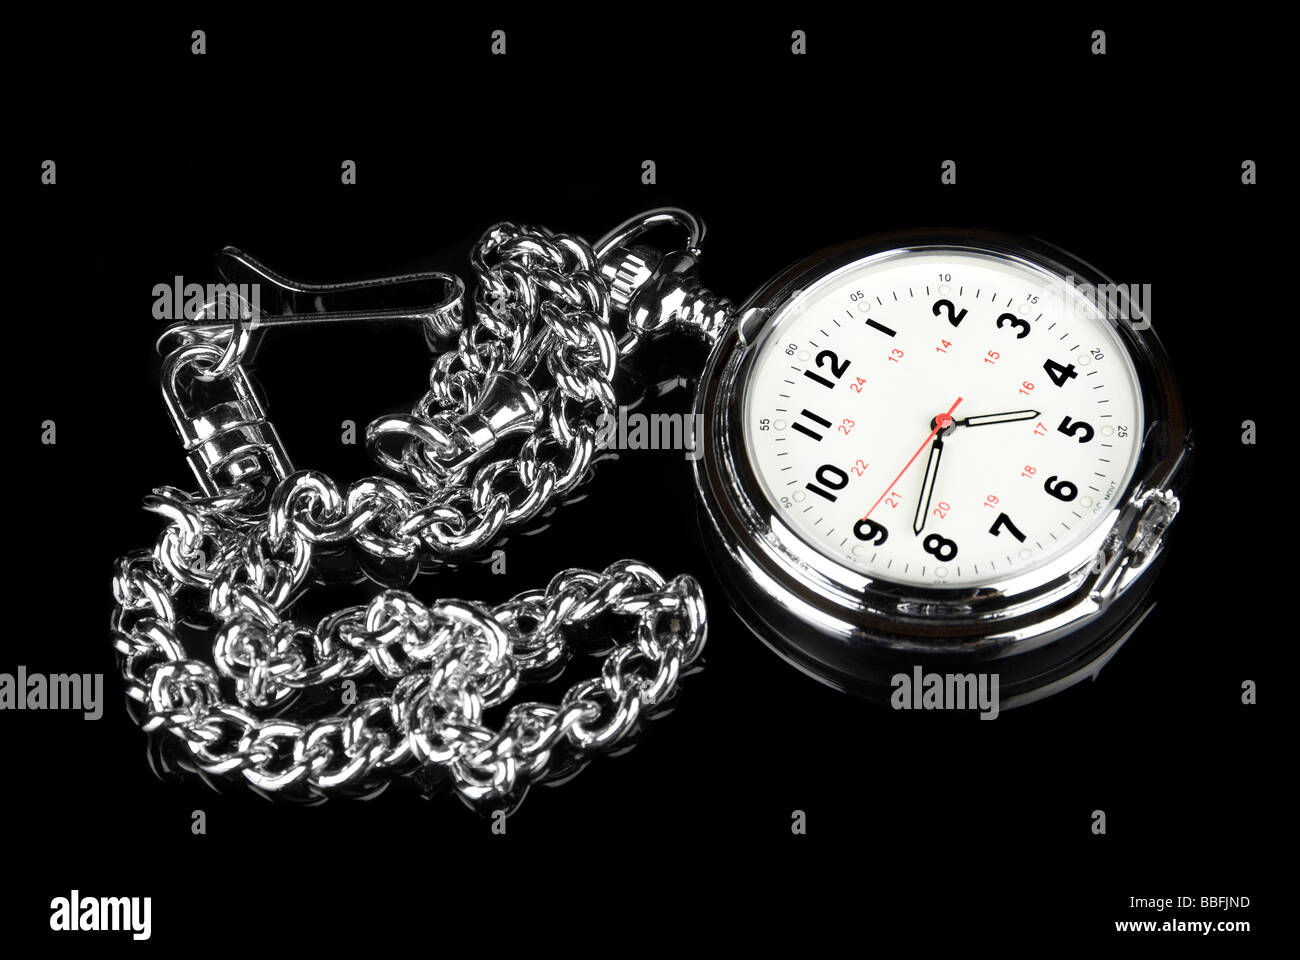 A pocket watch on a black reflective surface shows elegance and style Stock Photo